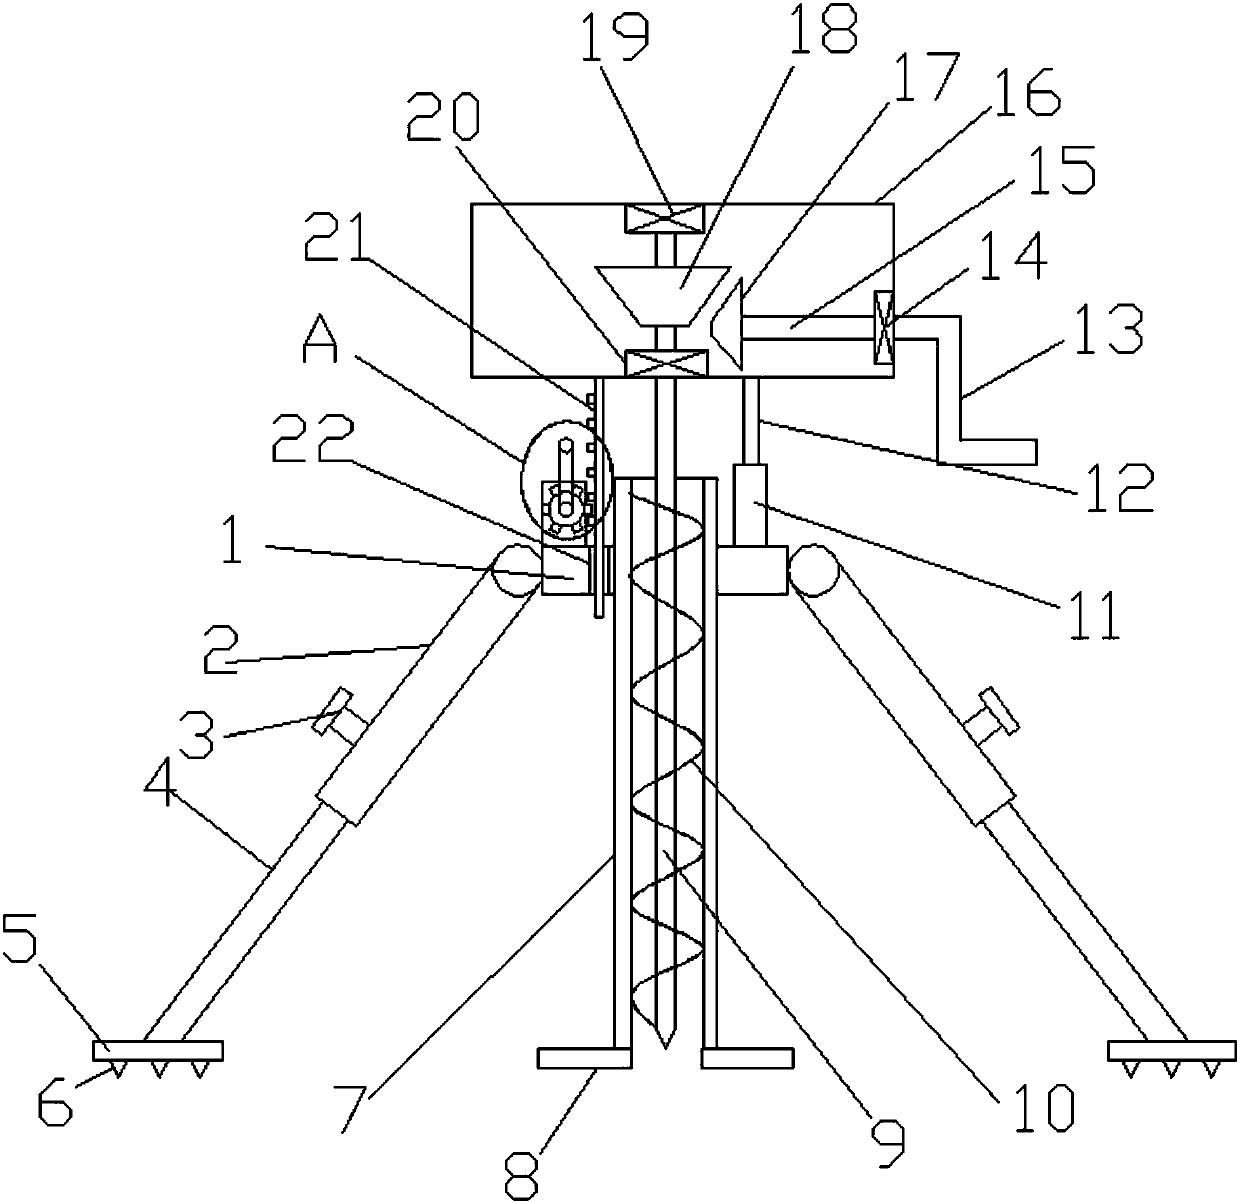 Soil sampling device for construction engineering